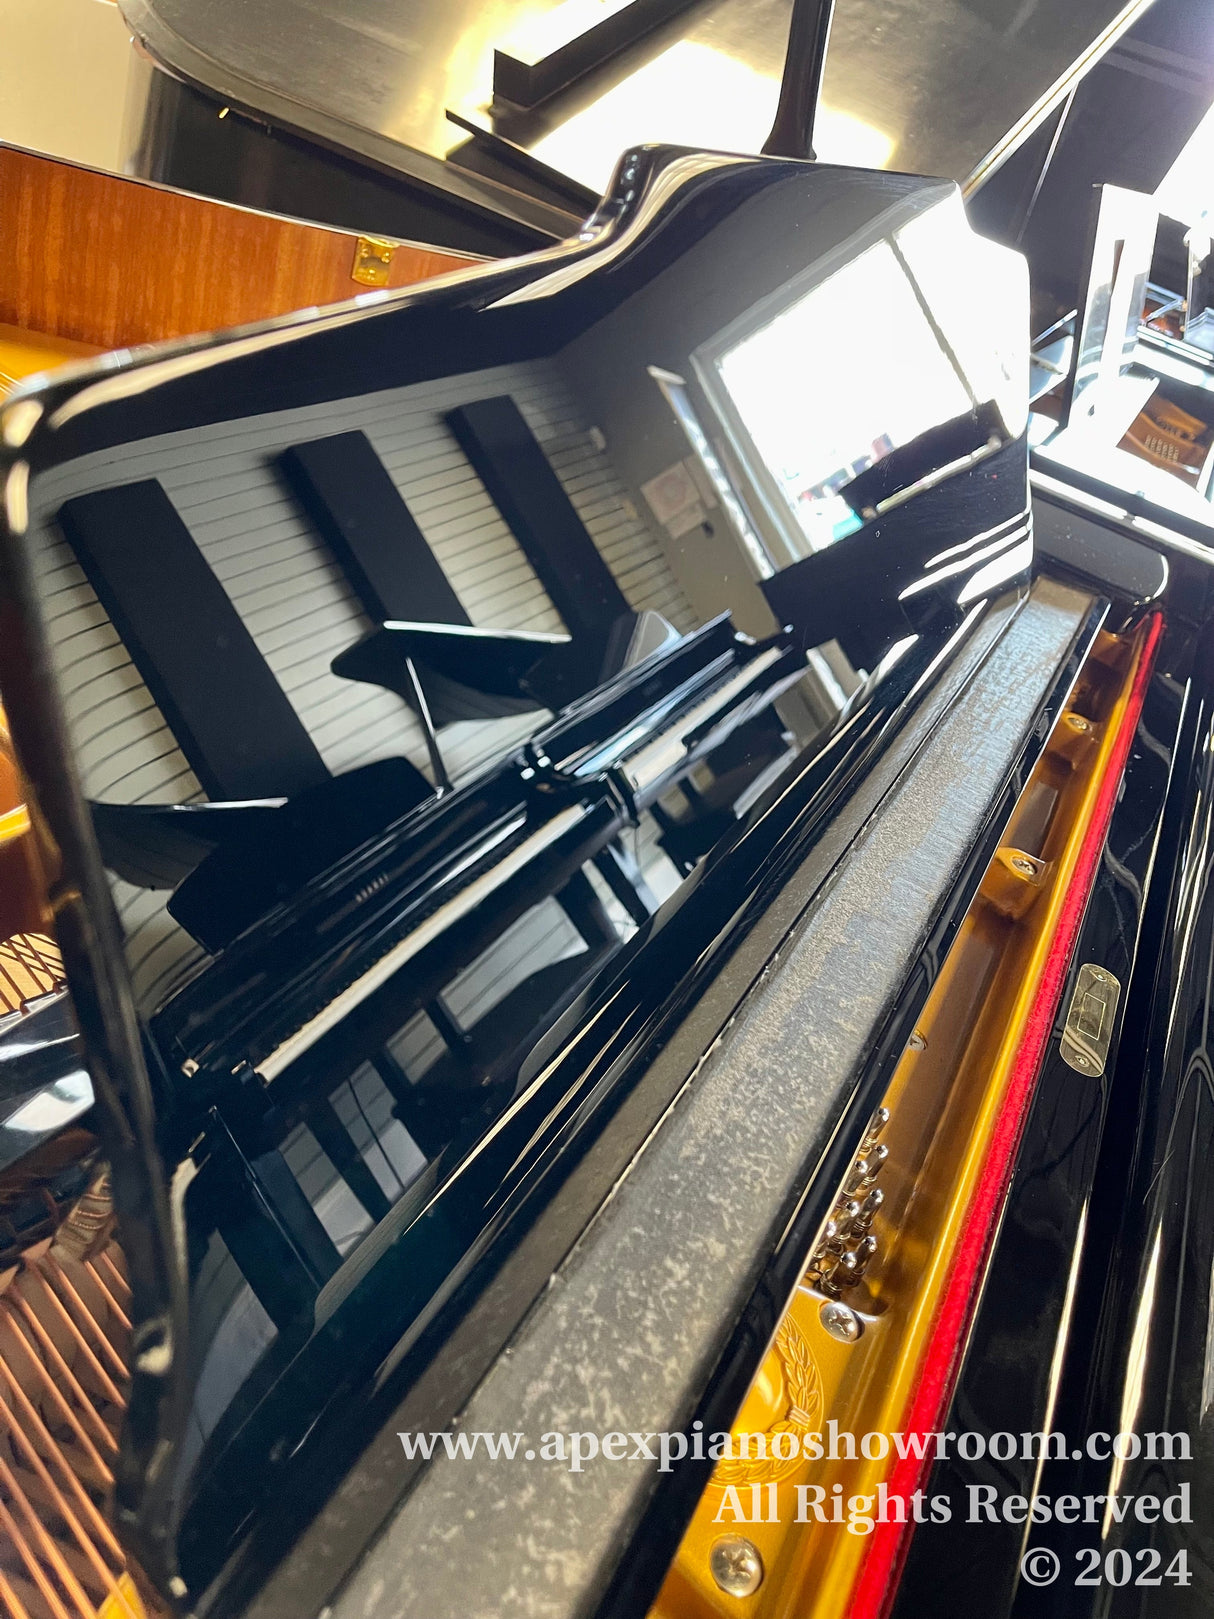 A glossy black grand piano with its lid open, showing the strings and hammers inside, reflecting the keyboard and the bright room its situated in.